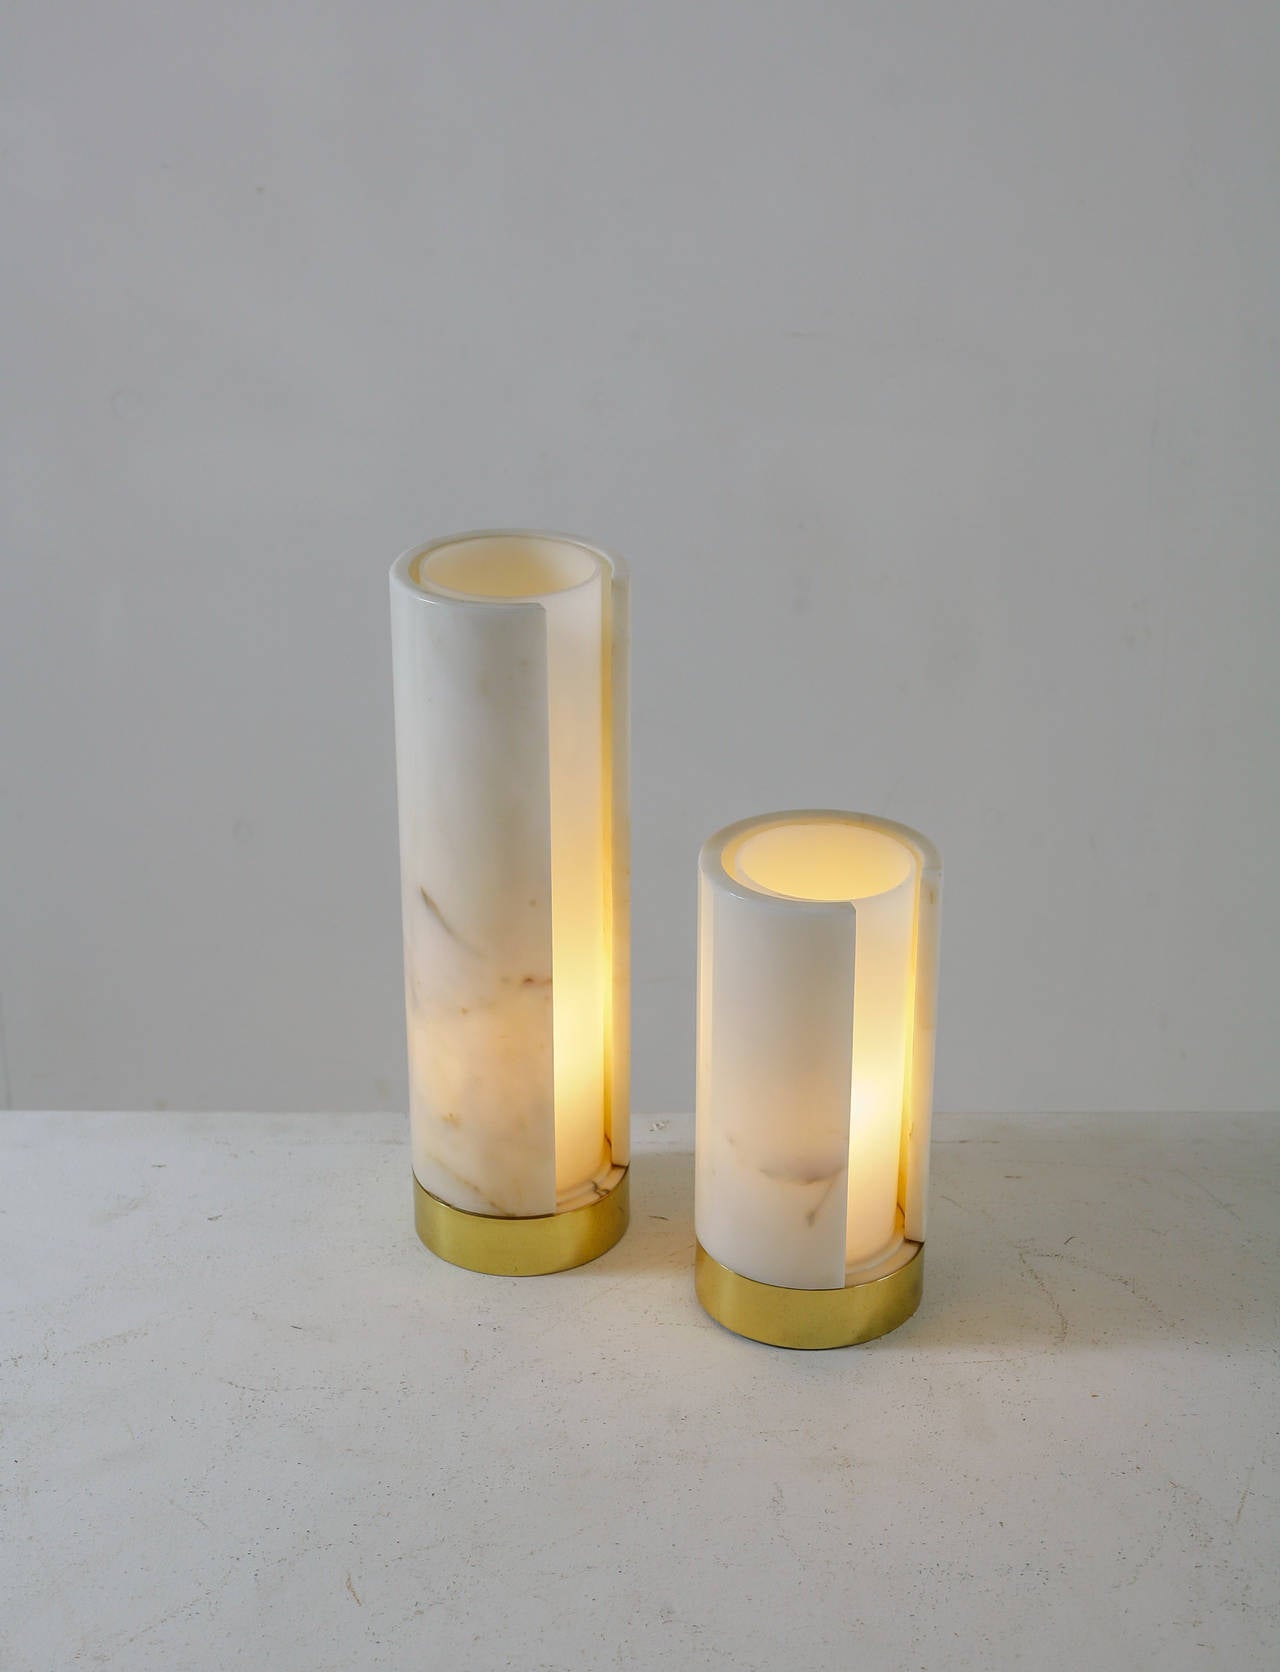 A pair of cylindrical table lamps made of a marble shade with a plexiglass diffuser inside, standing on a brass base. The marble has a very light pattern and is in excellent condition. 

The small one has a diameter of 13.5 cm and is 28 cm high.